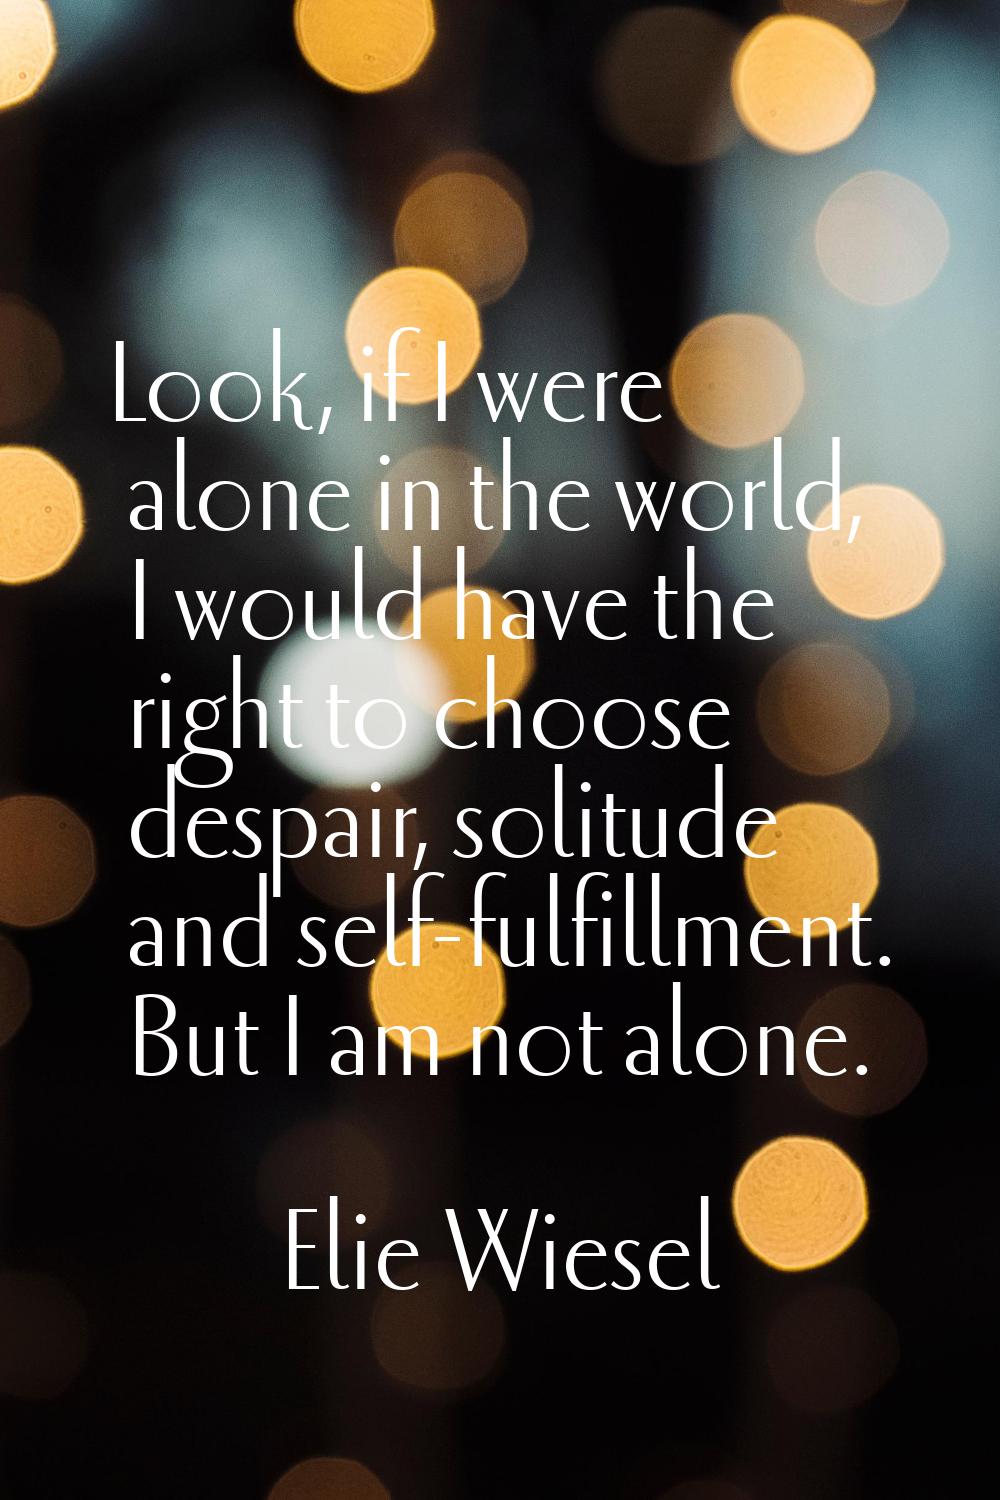 Look, if I were alone in the world, I would have the right to choose despair, solitude and self-ful